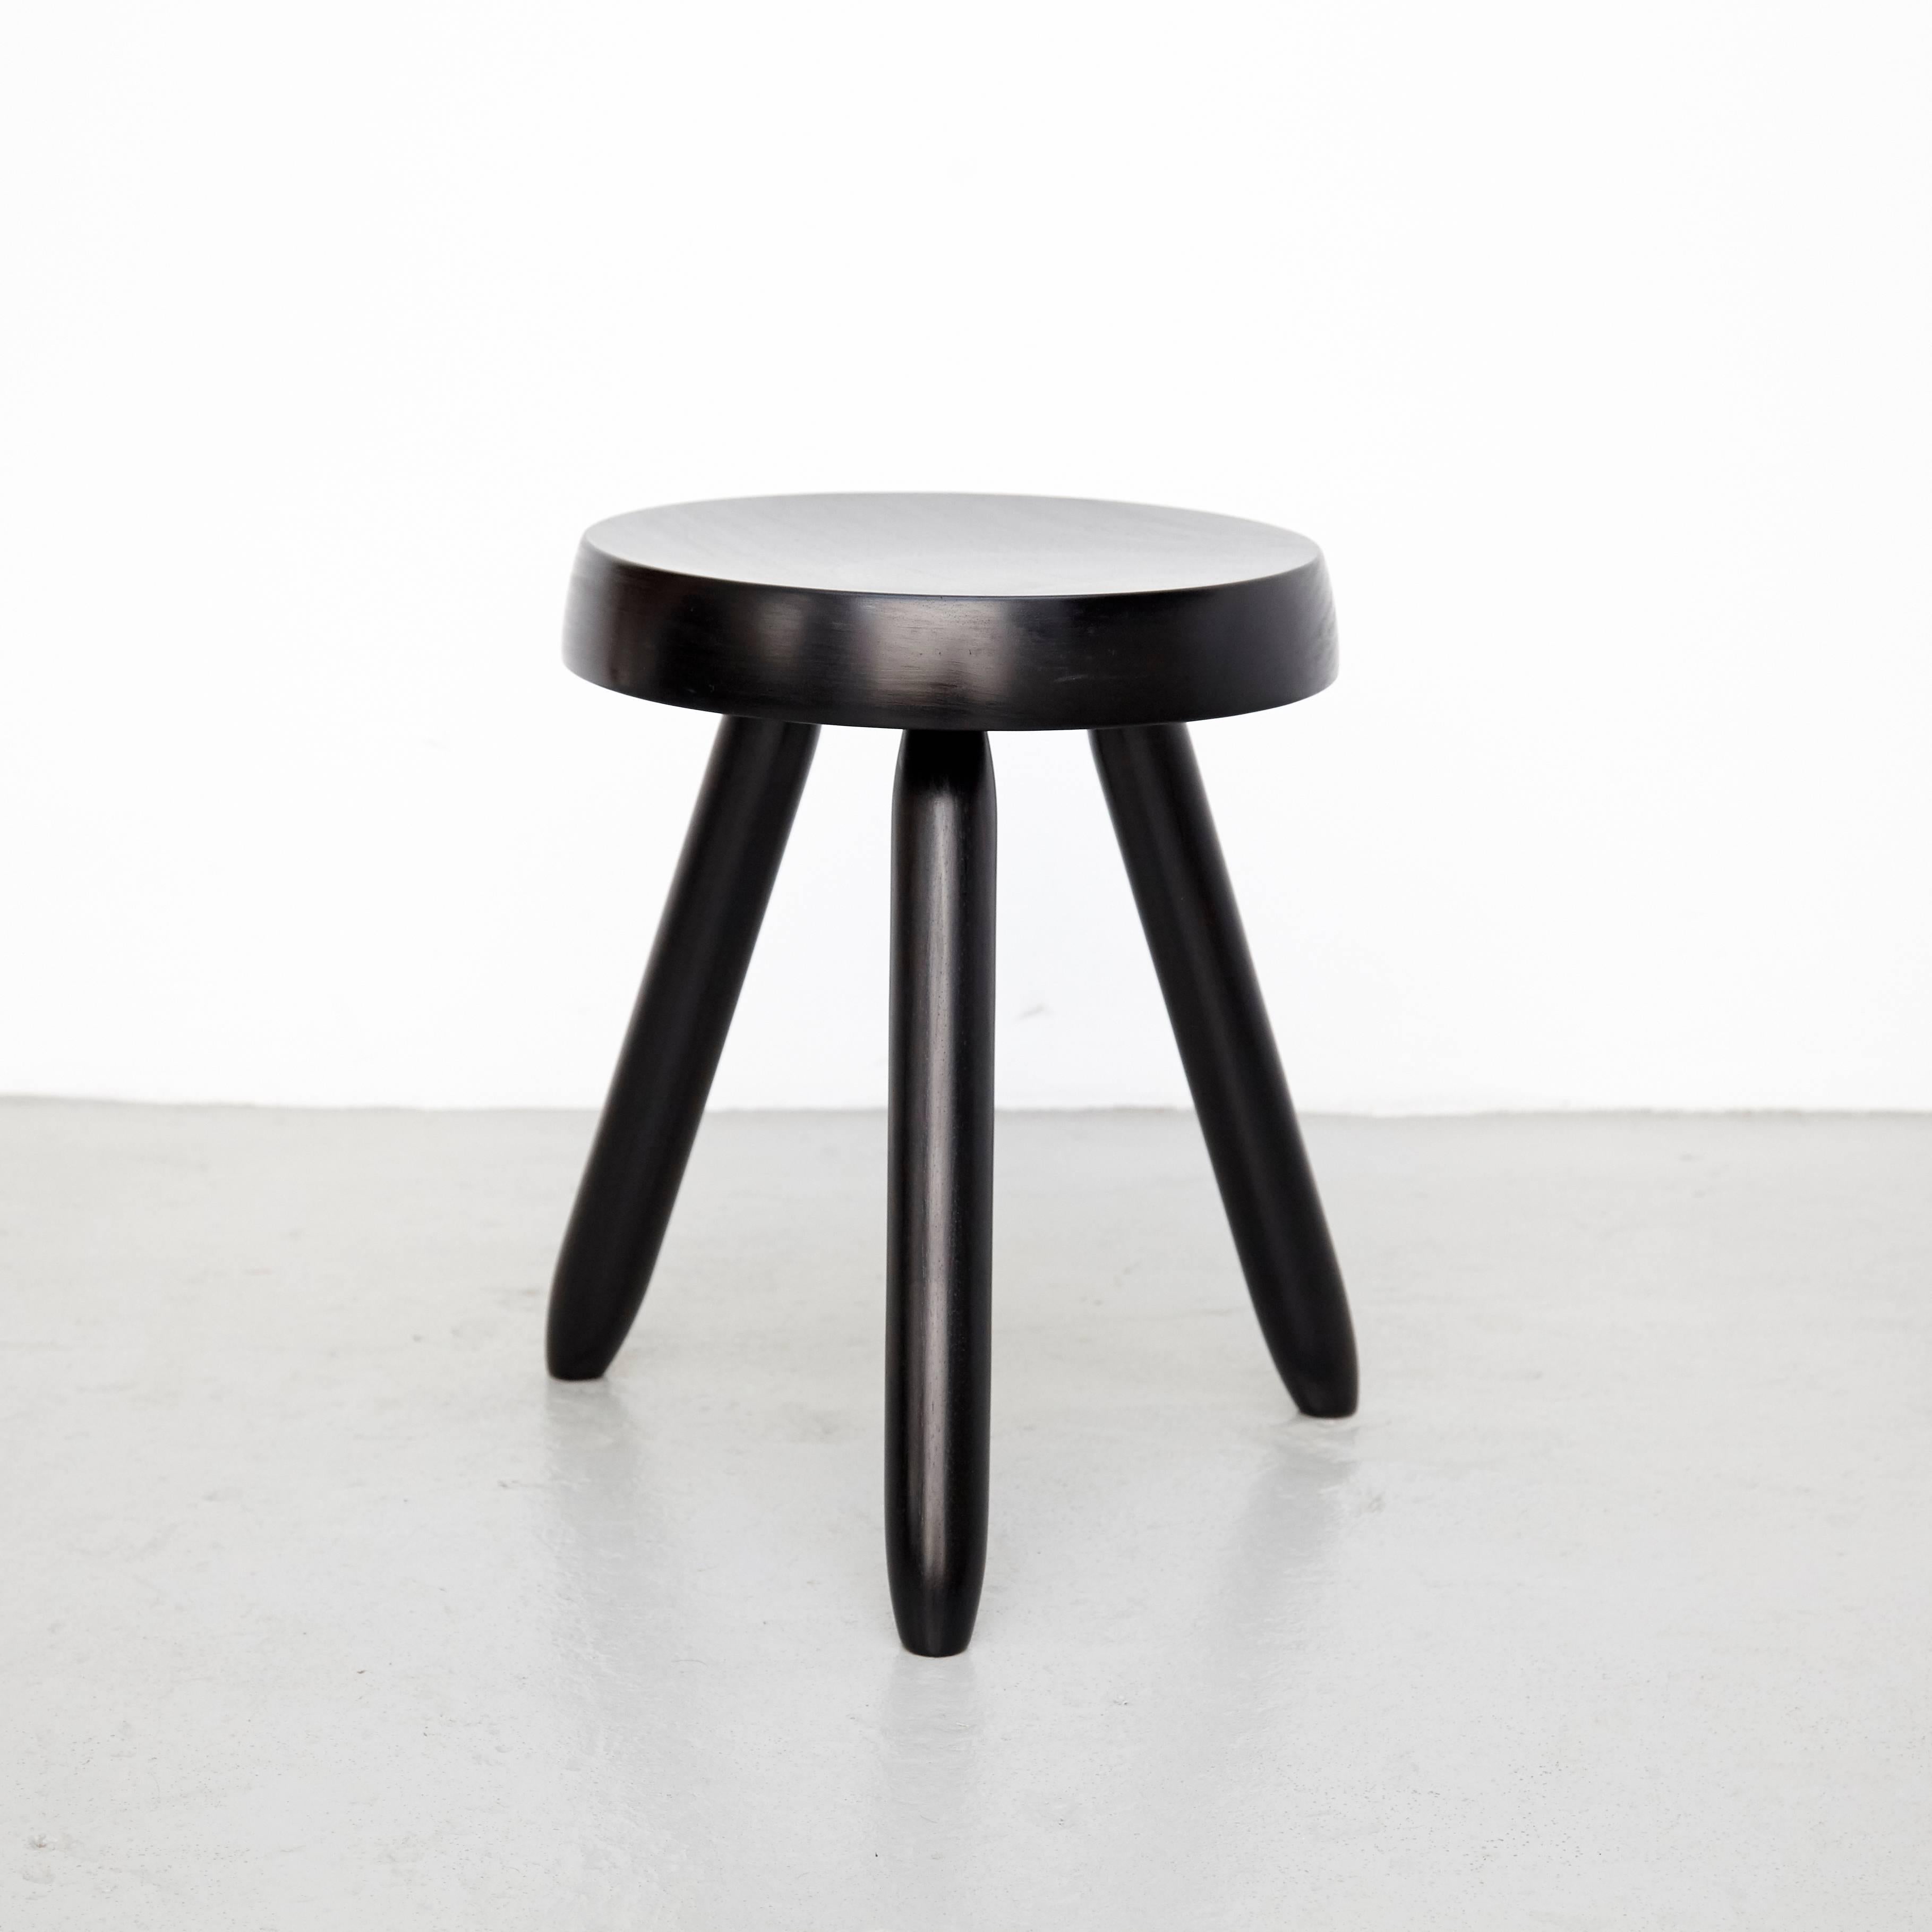 Late 20th Century Set of Three Stools in the Style of Charlotte Perriand